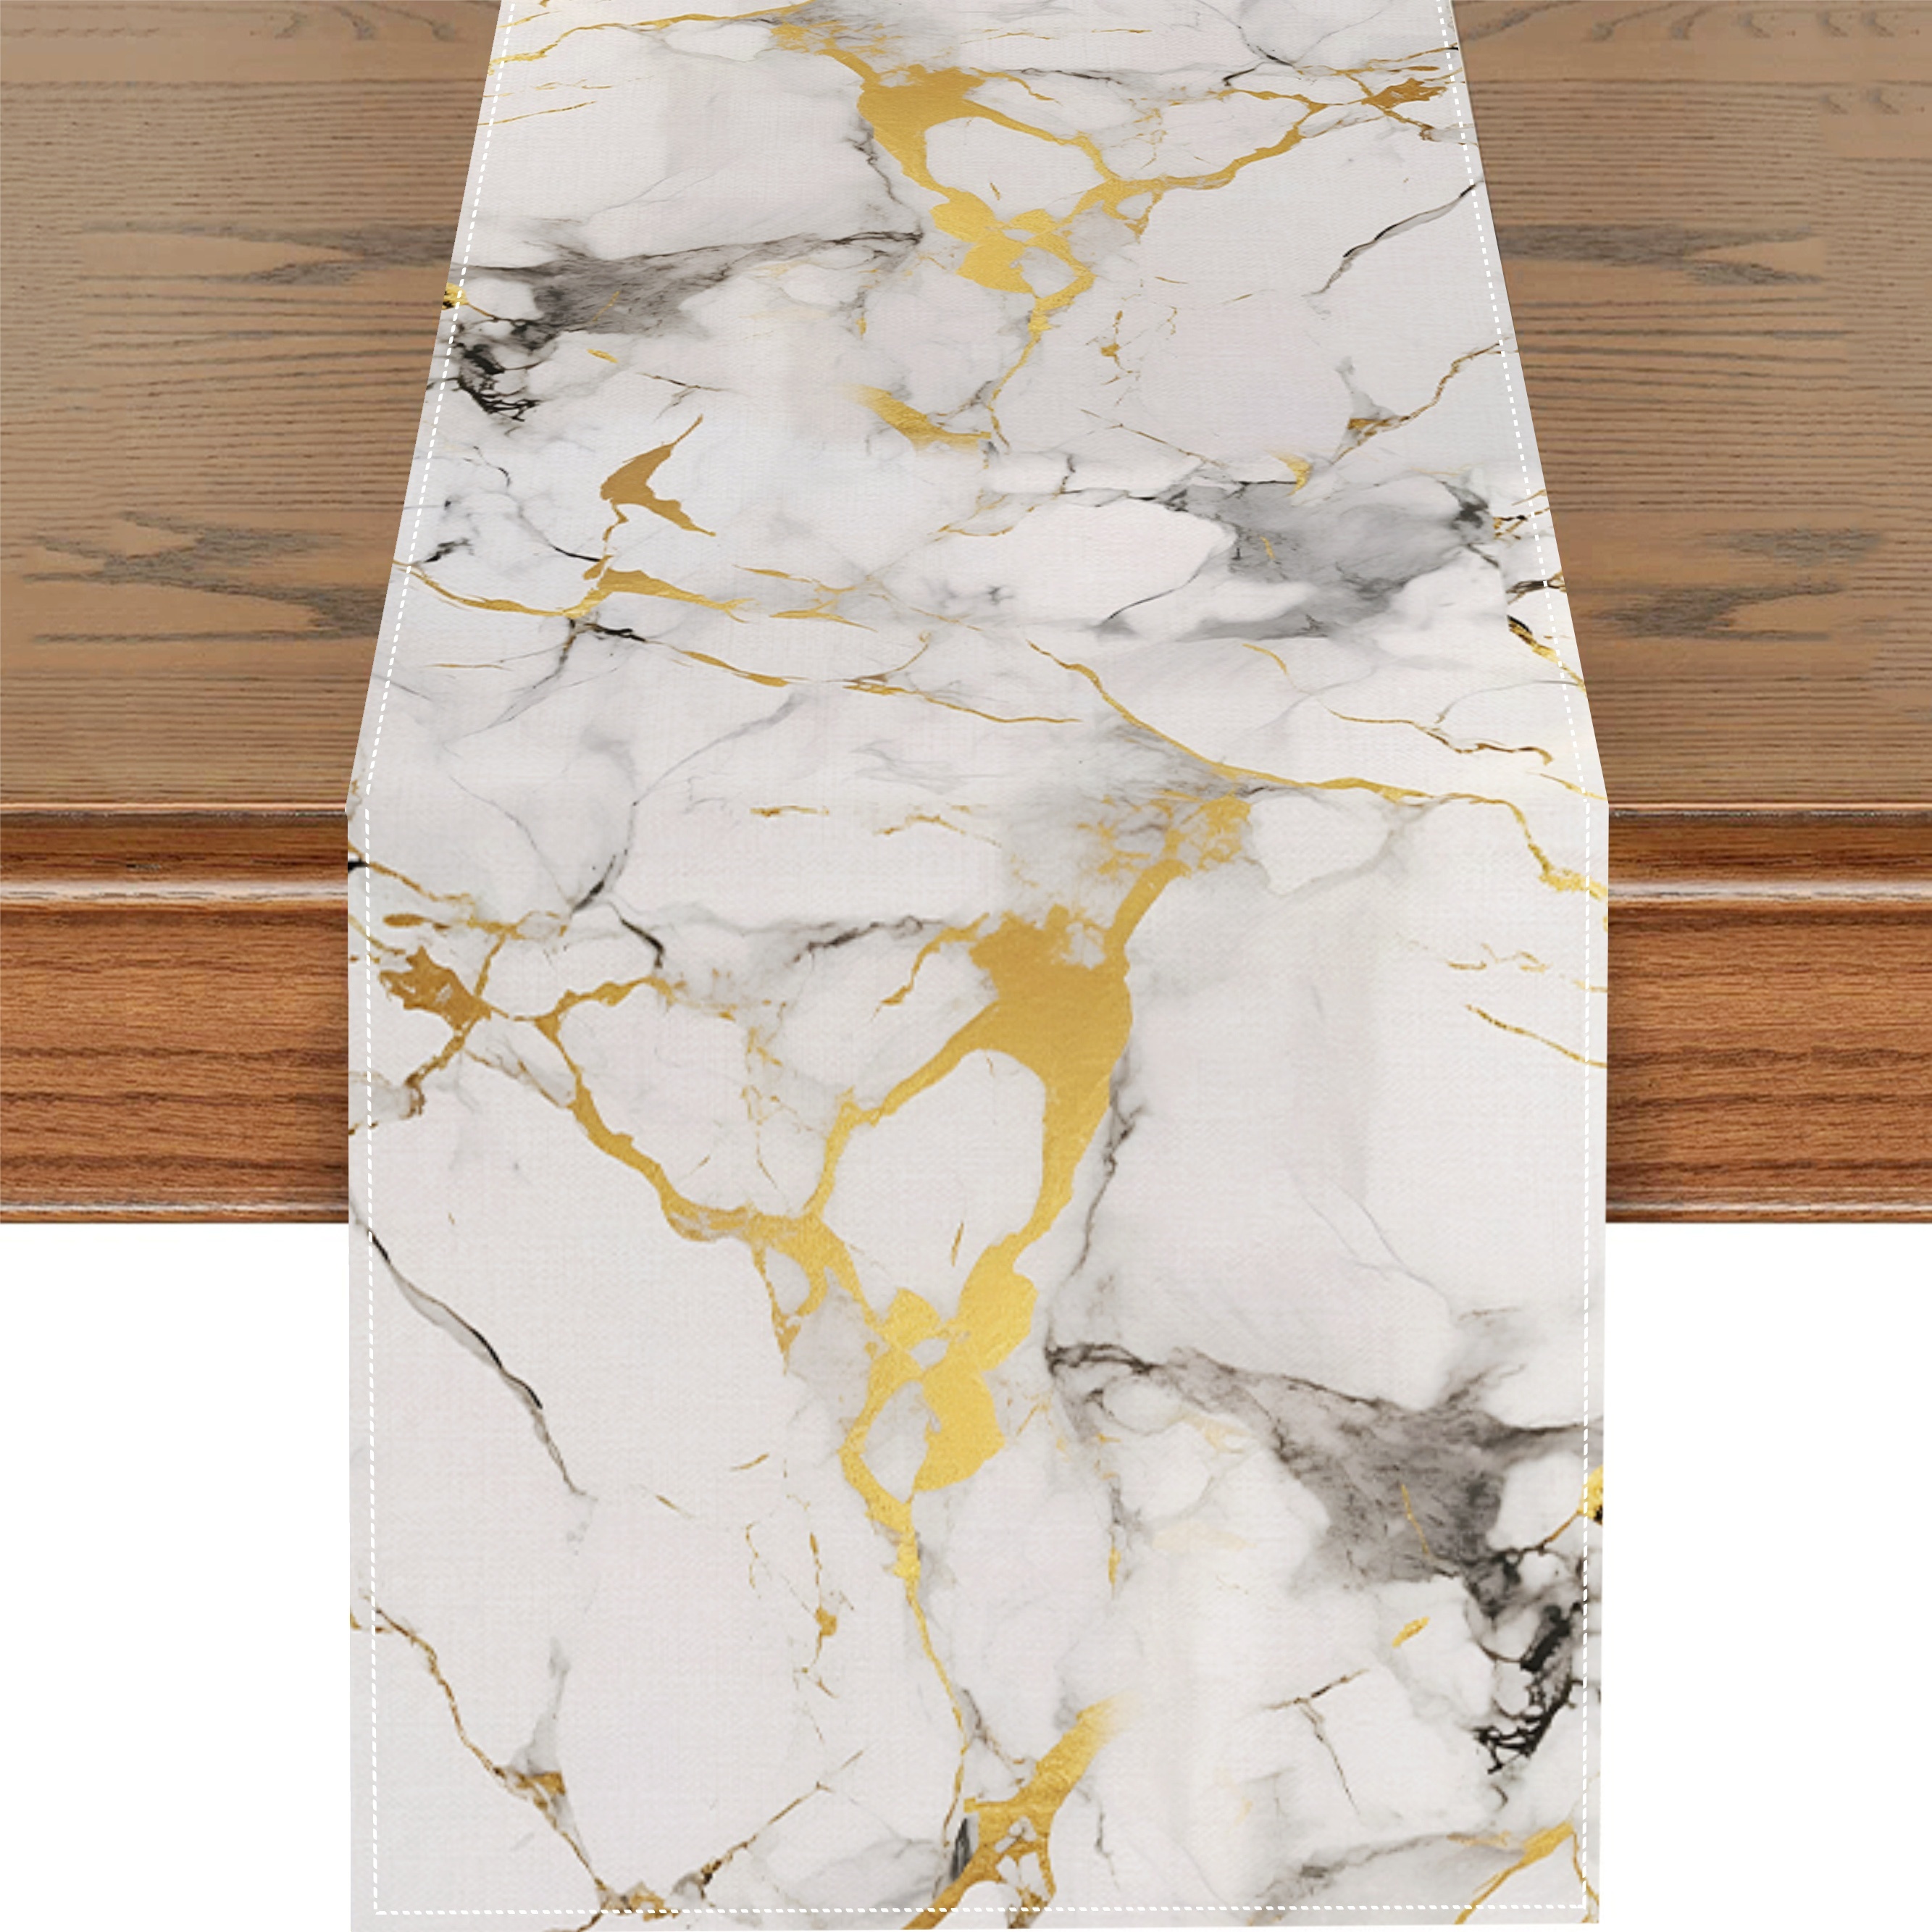 

1pc, Elegant Marbled Design Table Runner, Linen Material, Versatile Use For All Seasons, Durable & Decorative Runner For Dining And Coffee Tables, Indoor And Outdoor